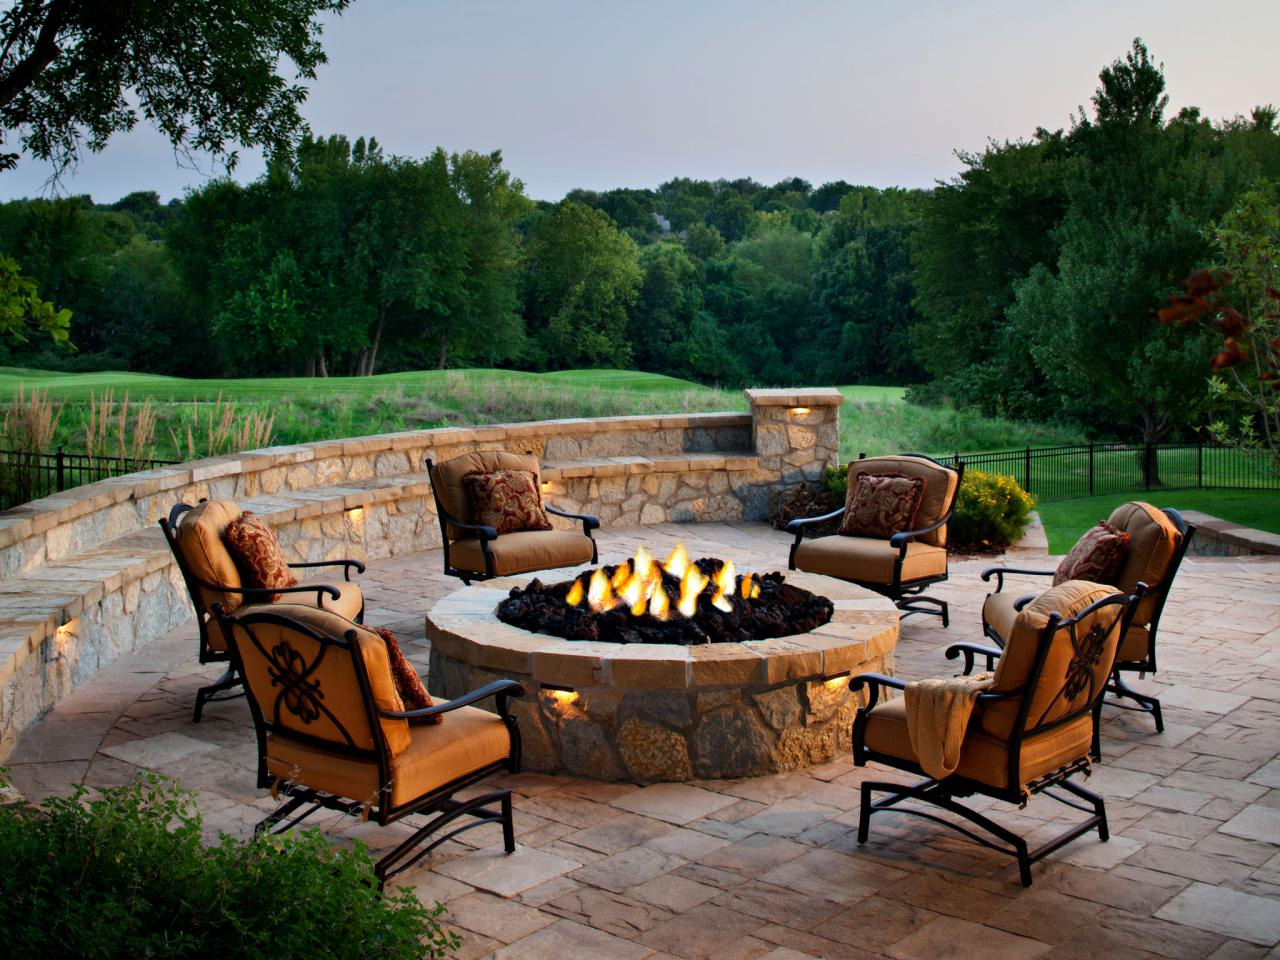 Outdoor Fire Pits Expand Living, Standard Fire Pit Patio Size